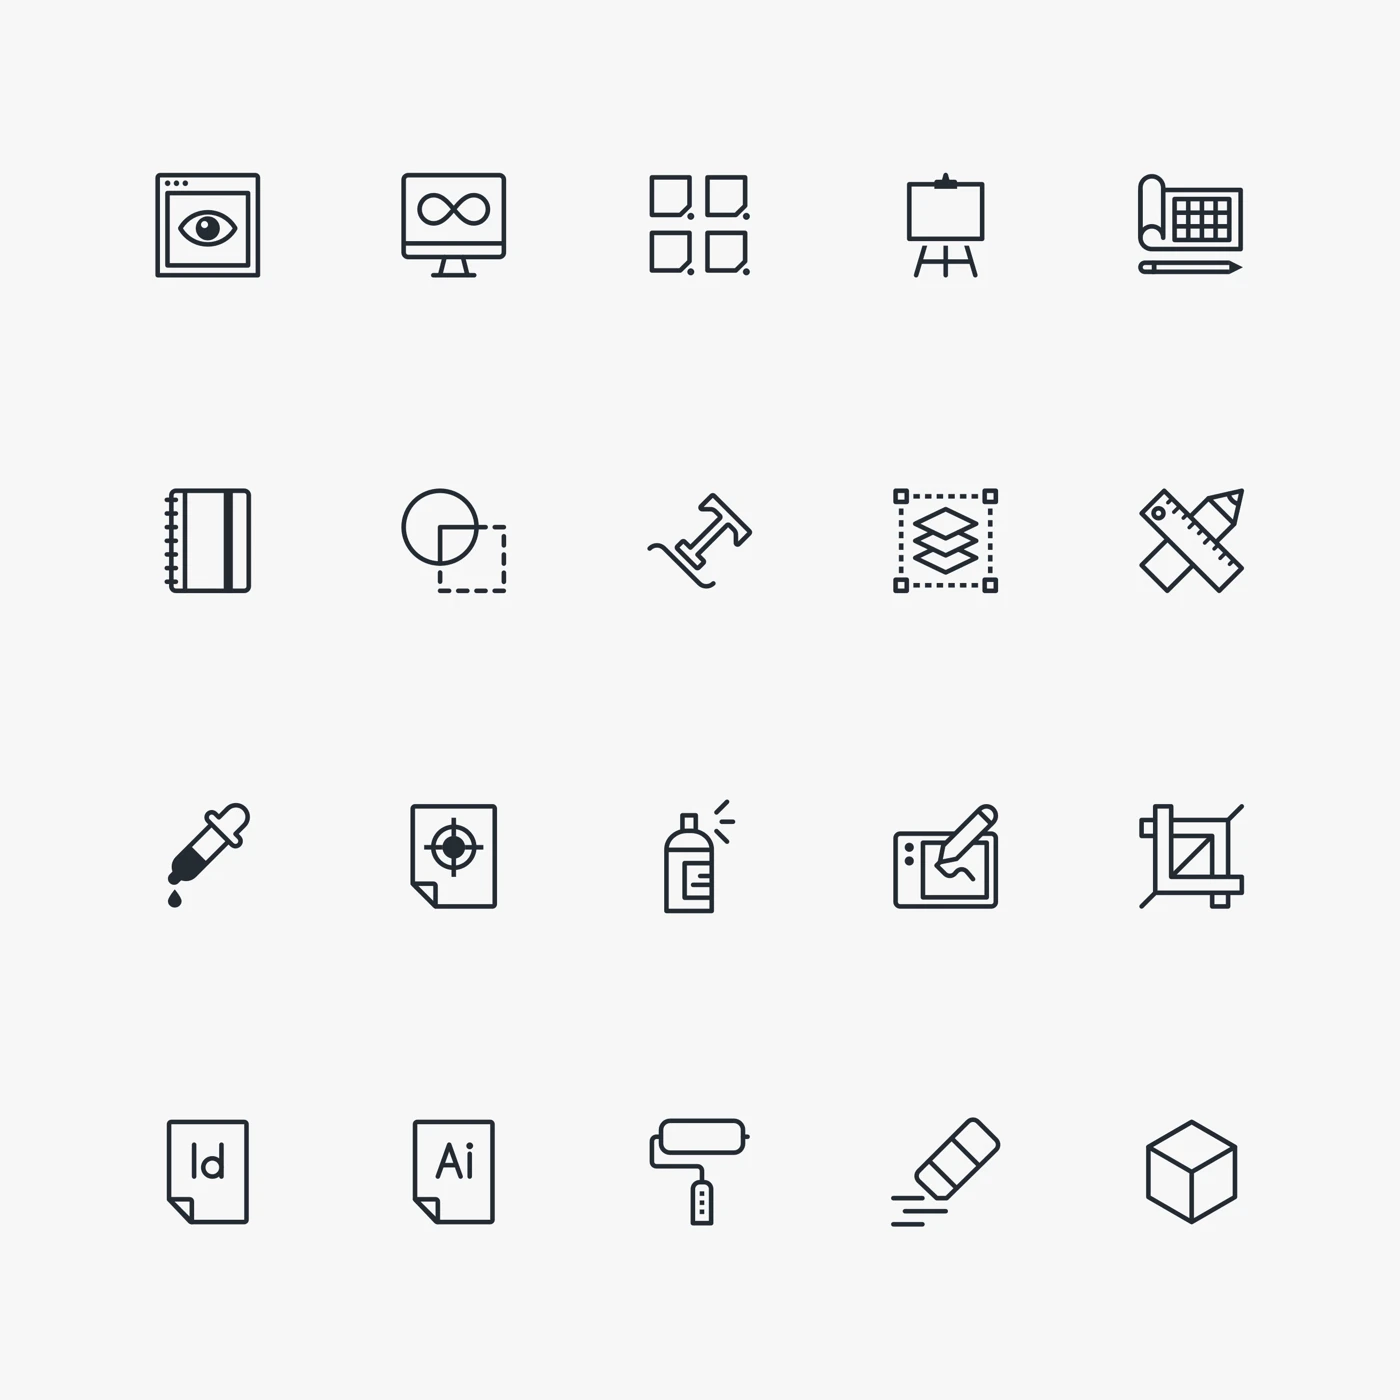 Design Tools Free Icon Pack - Grab this free icon pack with 20 graphic design & freelance-related icons. Comes in four colors—black, white, gray, and hot pink.